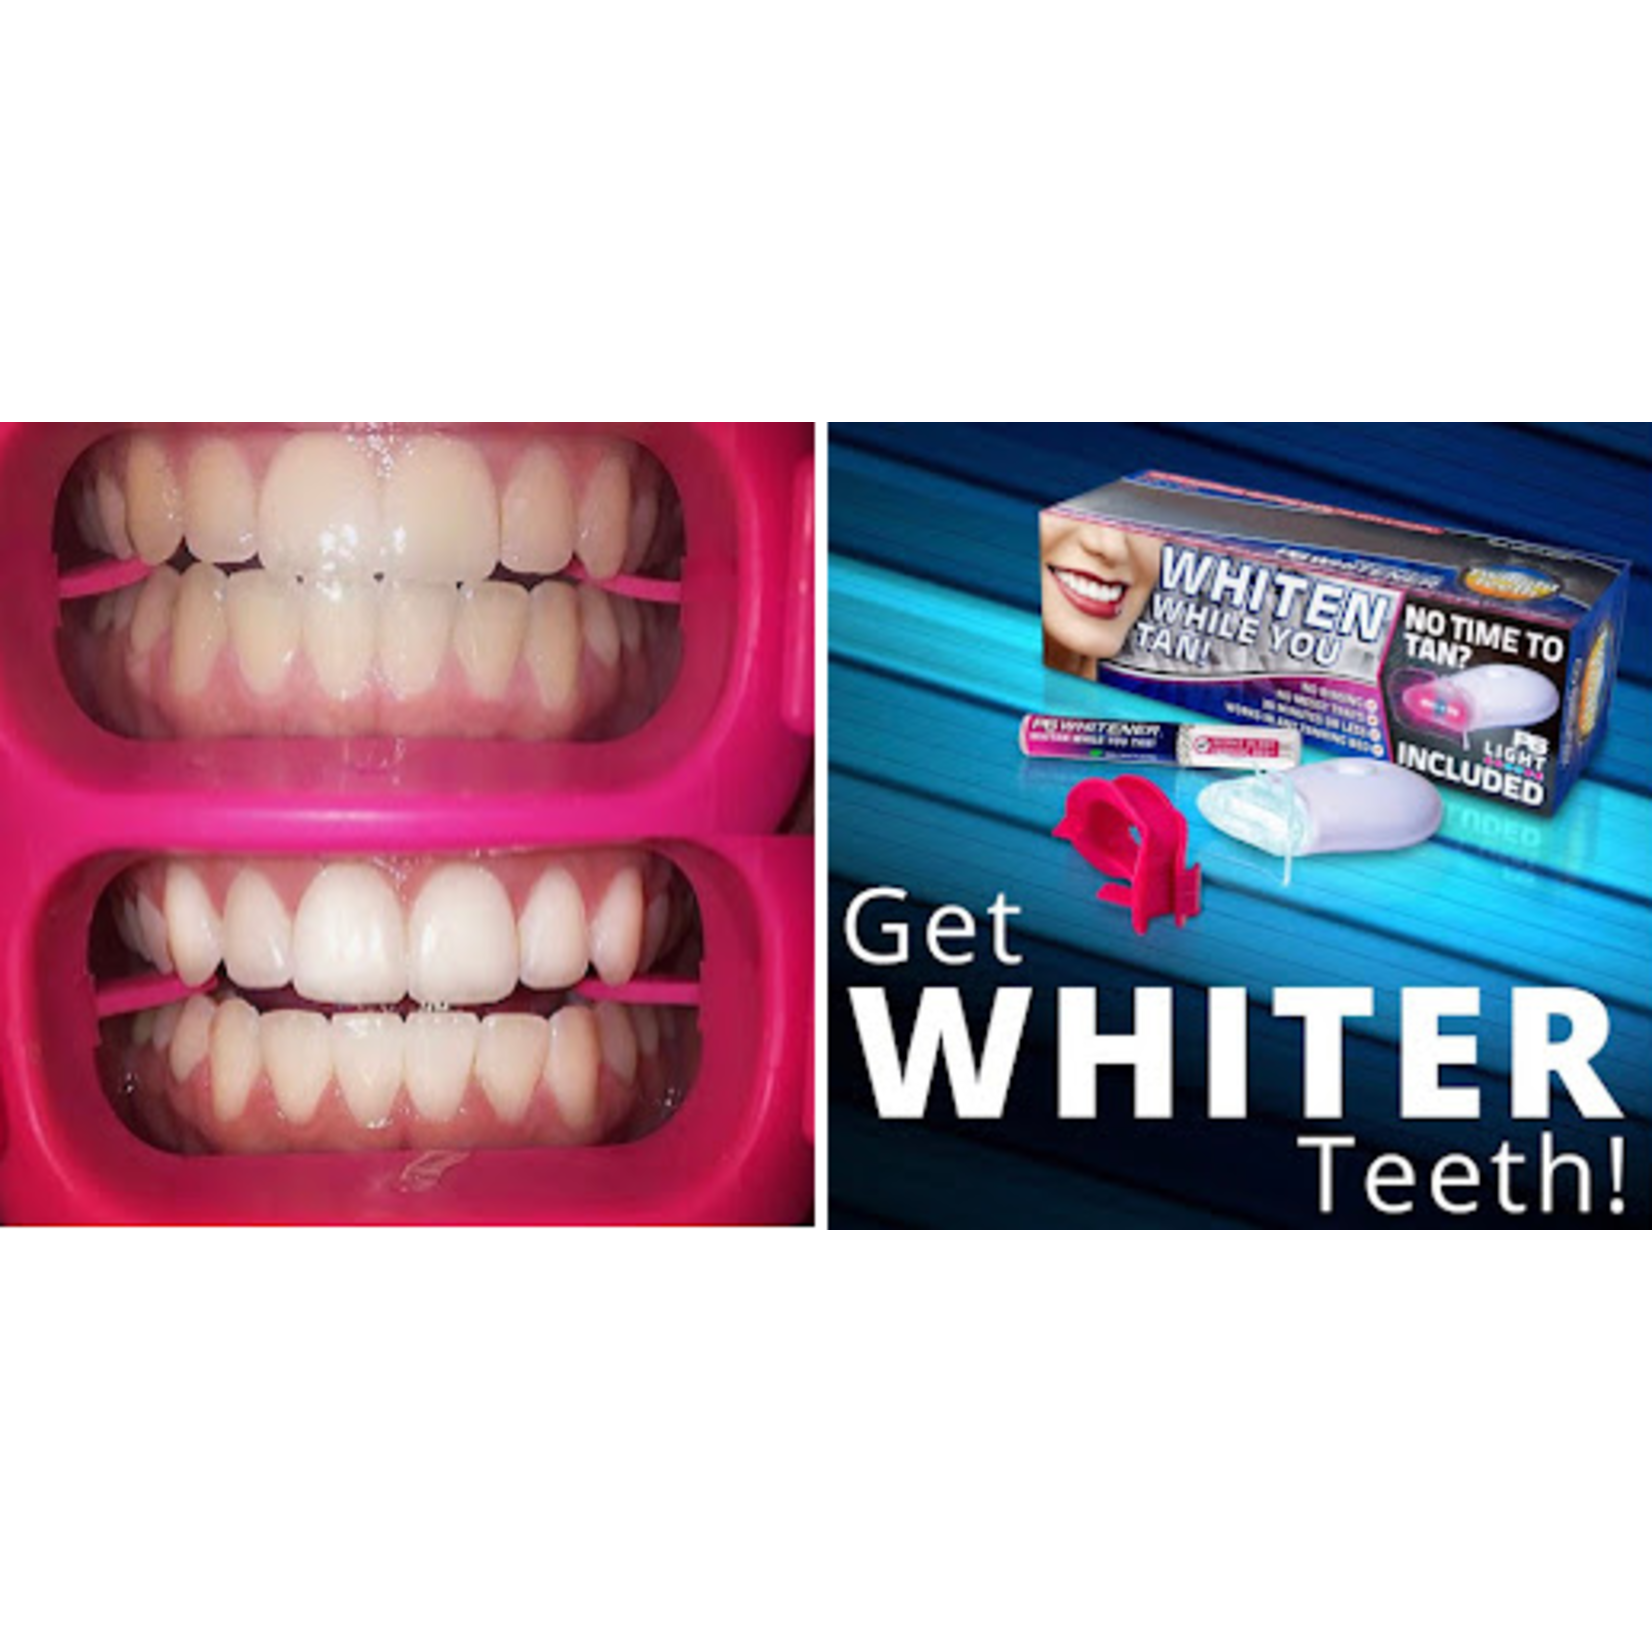 TWILIGHT TEETH Twilight Teeth Whitening Kit | Specially Designed Kit Includes Whitener Gel, Mouthpiece For Tanning Bed Use & A Powerful UV Light Mouthpiece For At Home Whitening | No Rinse Gel Whitener Formula